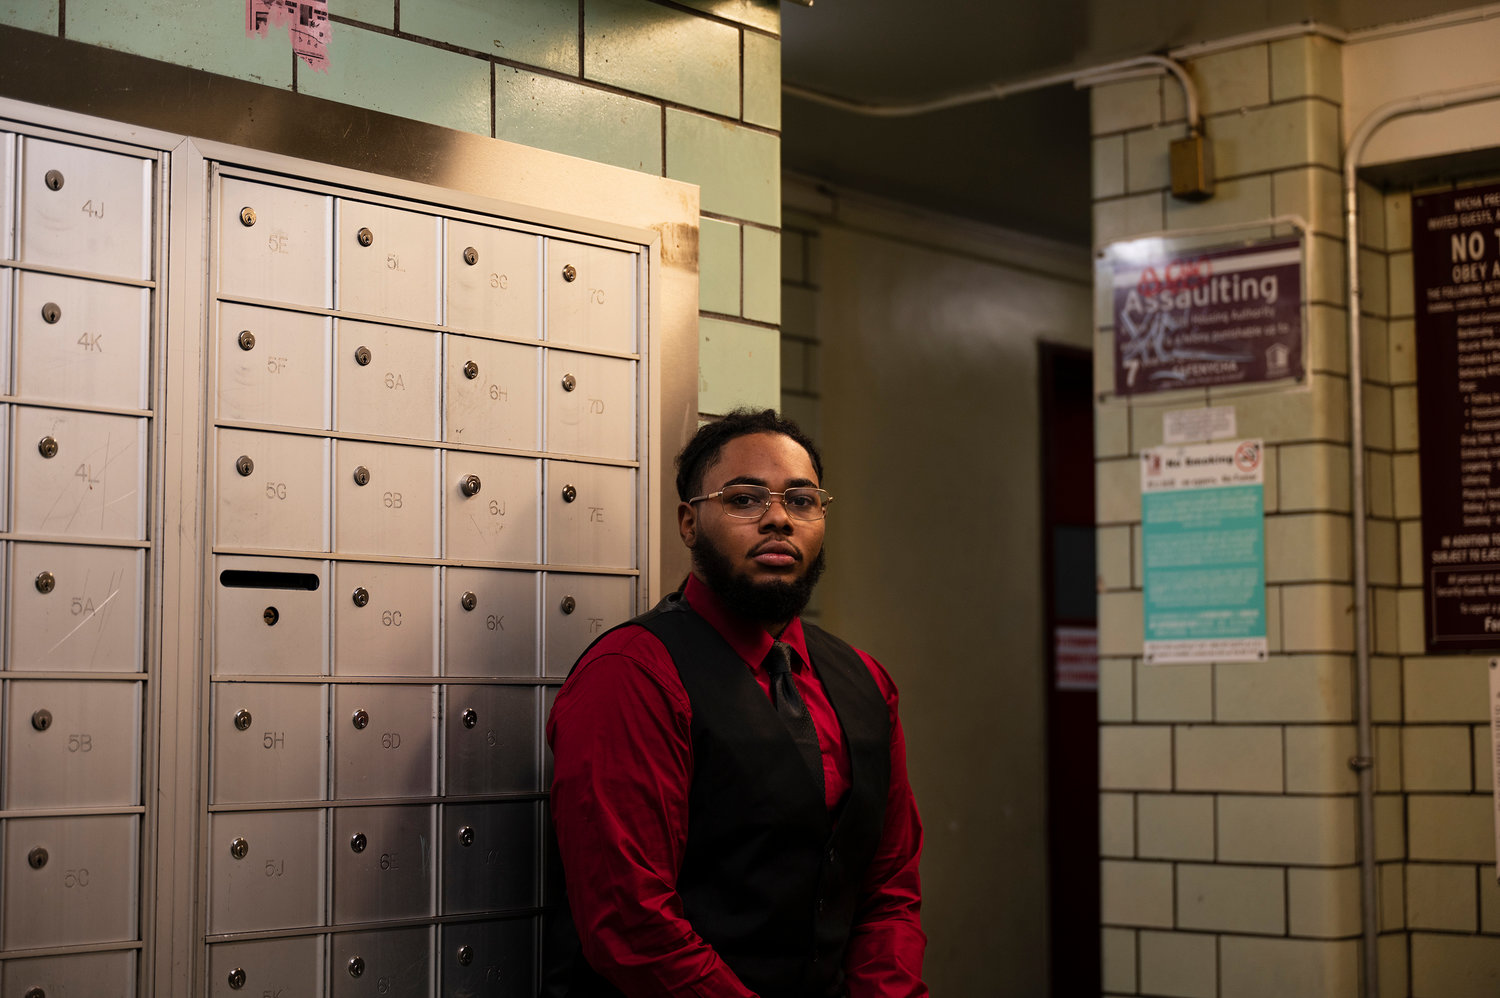 N’soligne Jon Paul Lauriano is running against Tony Edwards for Marble Hill Houses’ tenant association president. The 23-year-old hopes to improve the quality of life at the New York City Housing Authority complex by working with the city to expedite unit repairs all while building a better relationship with the 50th Precinct.